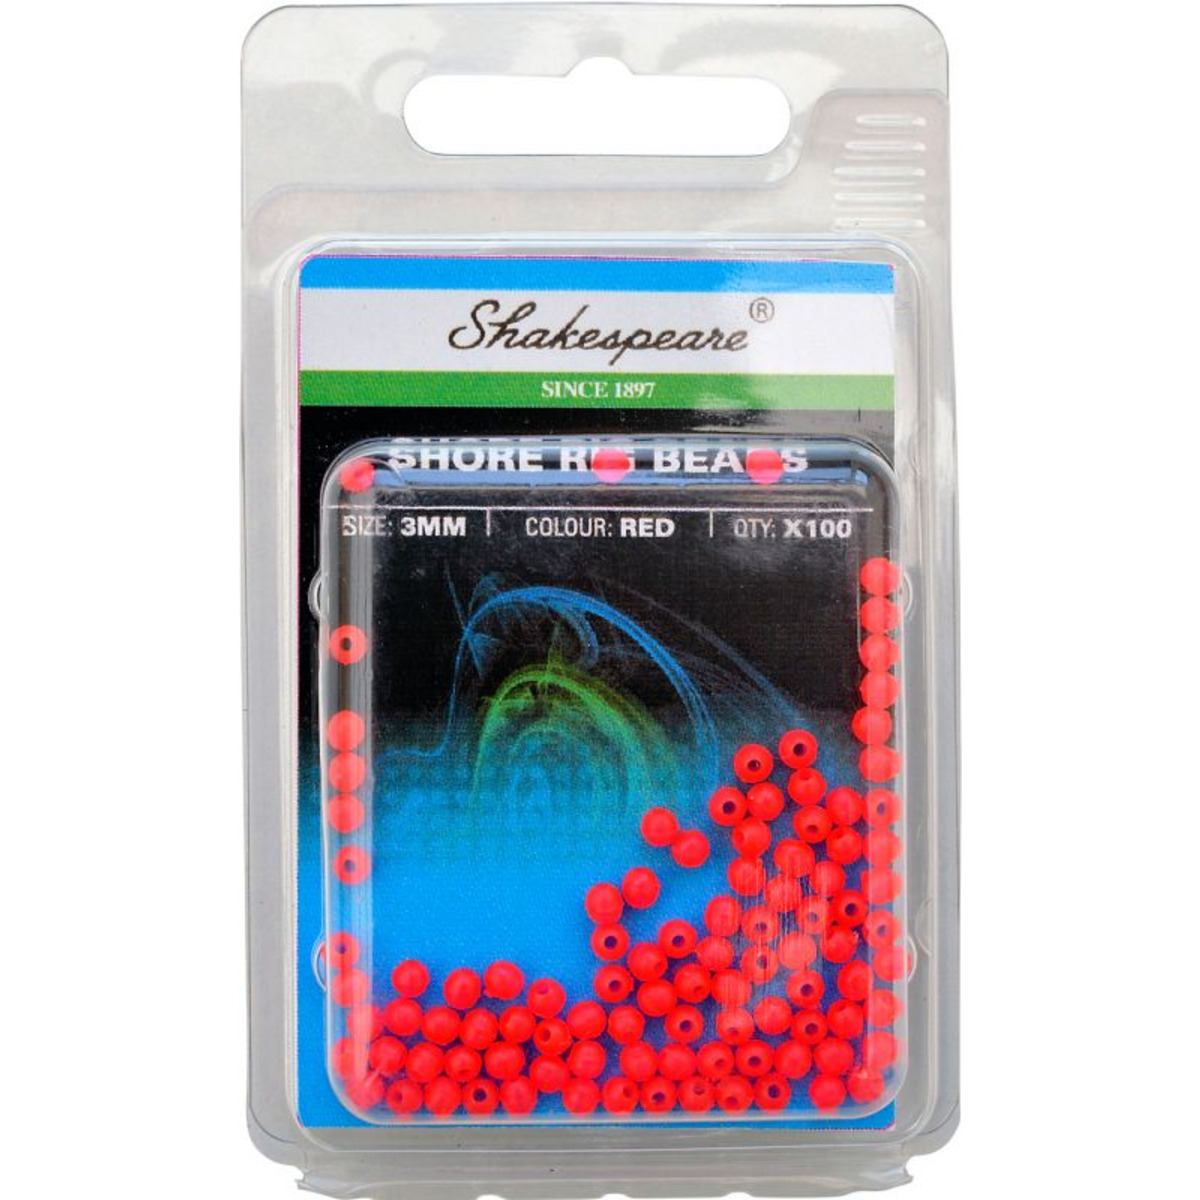 Shakespeare Shore Rig Beads - 3 mm - 12 g - Red